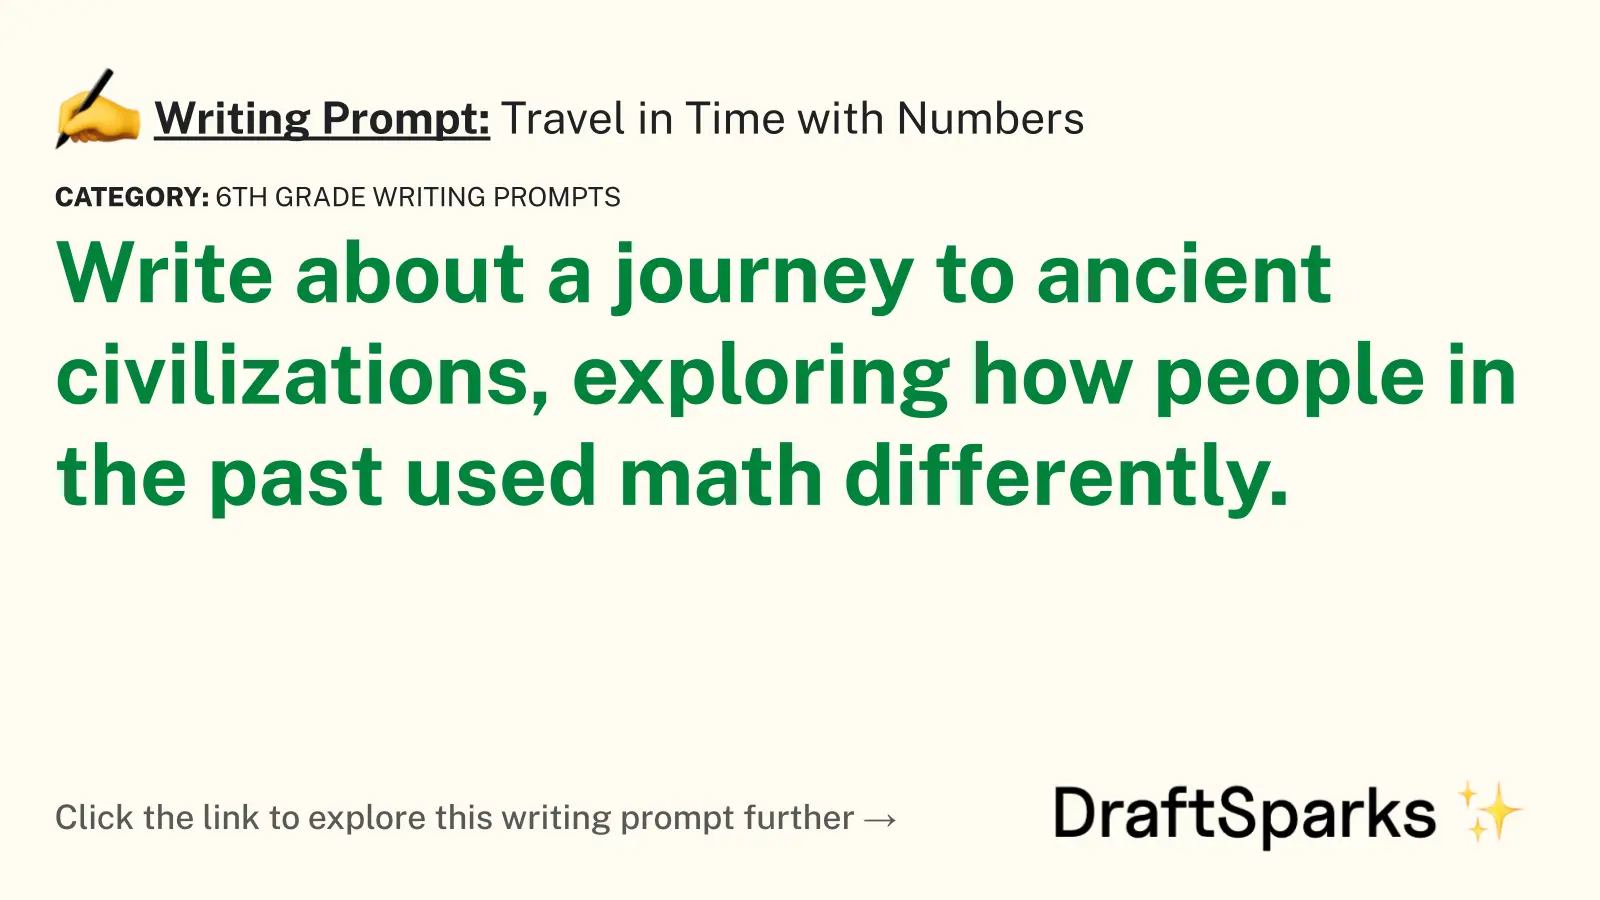 Travel in Time with Numbers